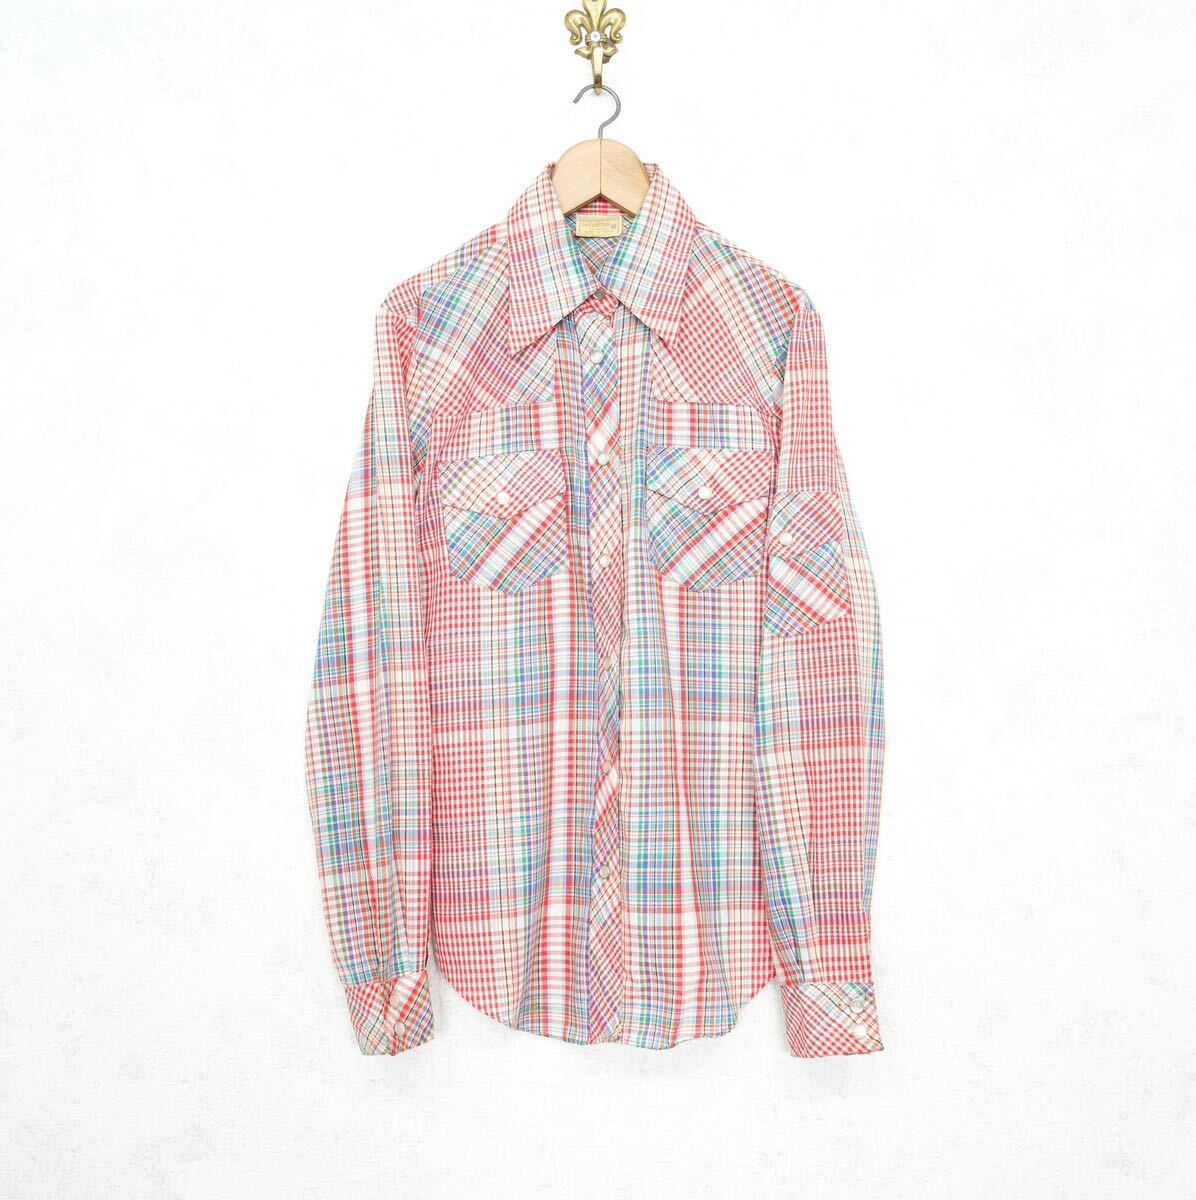 70's USA VINTAGE CHECK PATTERNED WESTERN SHIRT/70年代アメリカ古着チェック柄ウェスタンシャツ